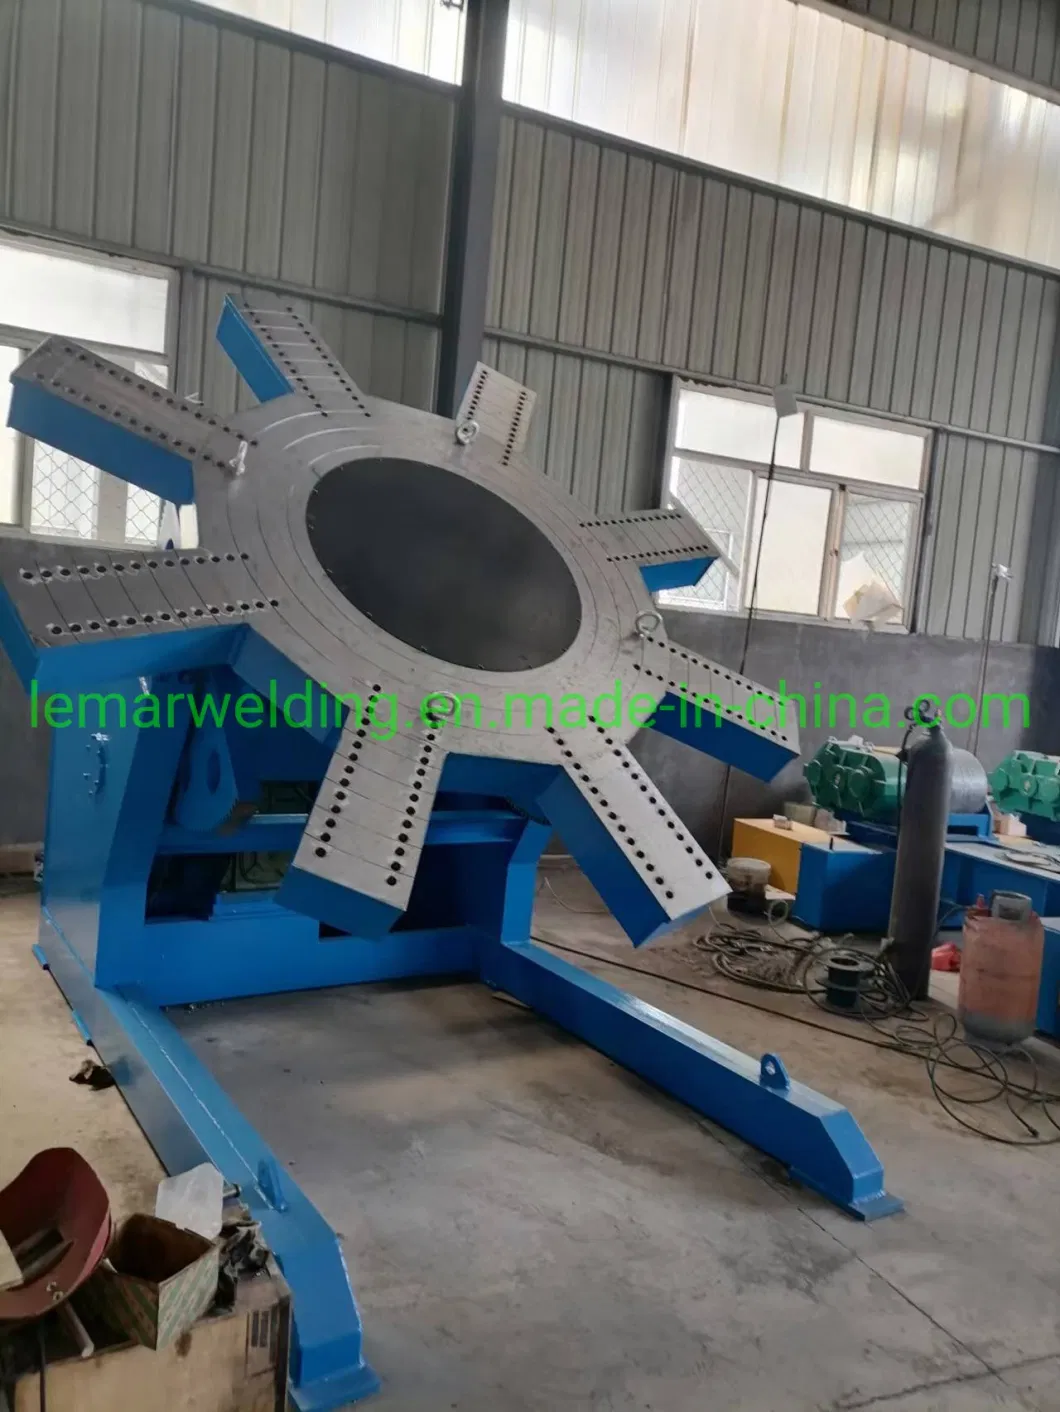 Big Loading 10 Ton 25000mm Diameter Automatic Welding Positioner Turning Table